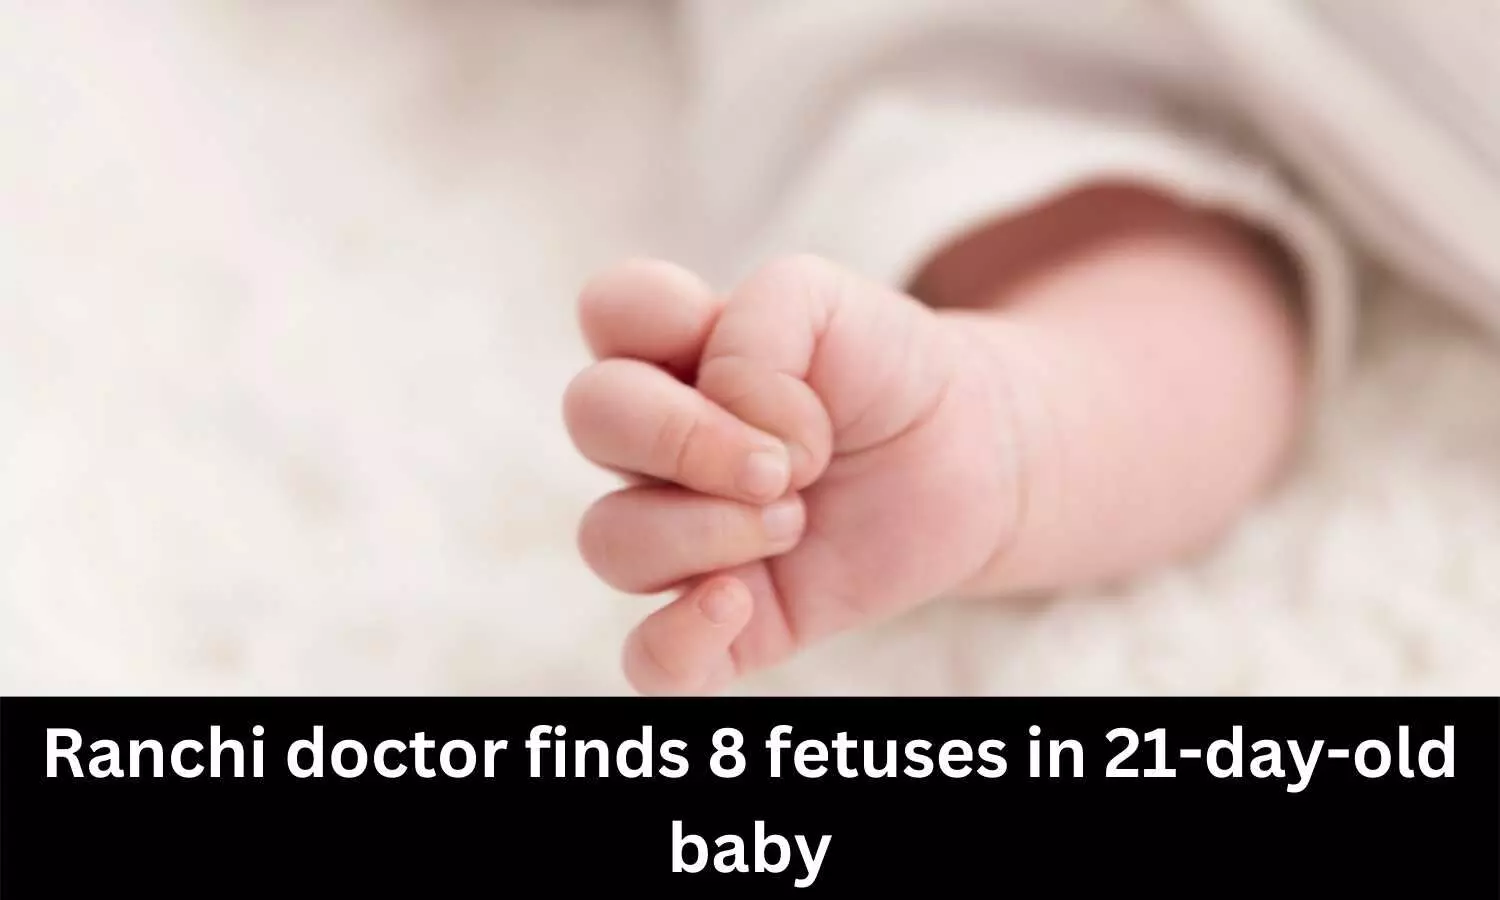 Ranchi: Doctor finds 8 fetuses in 21-day-old baby